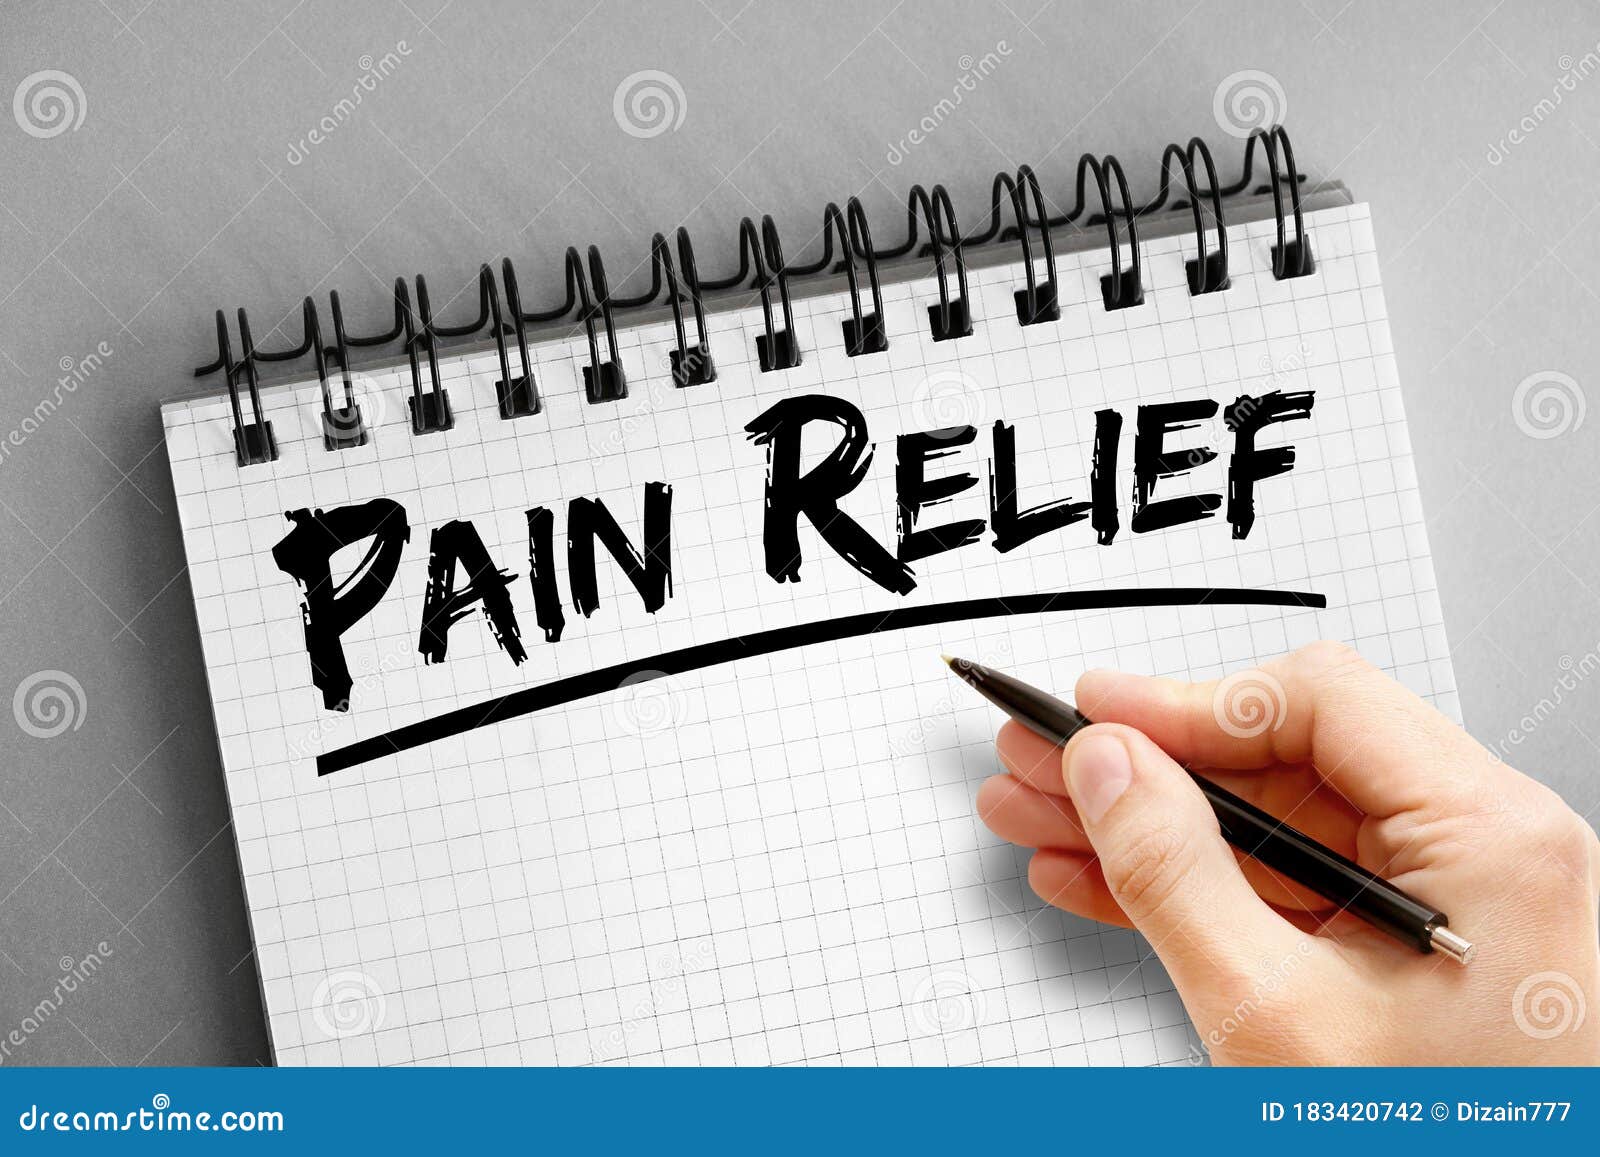 text note - pain relief, health concept